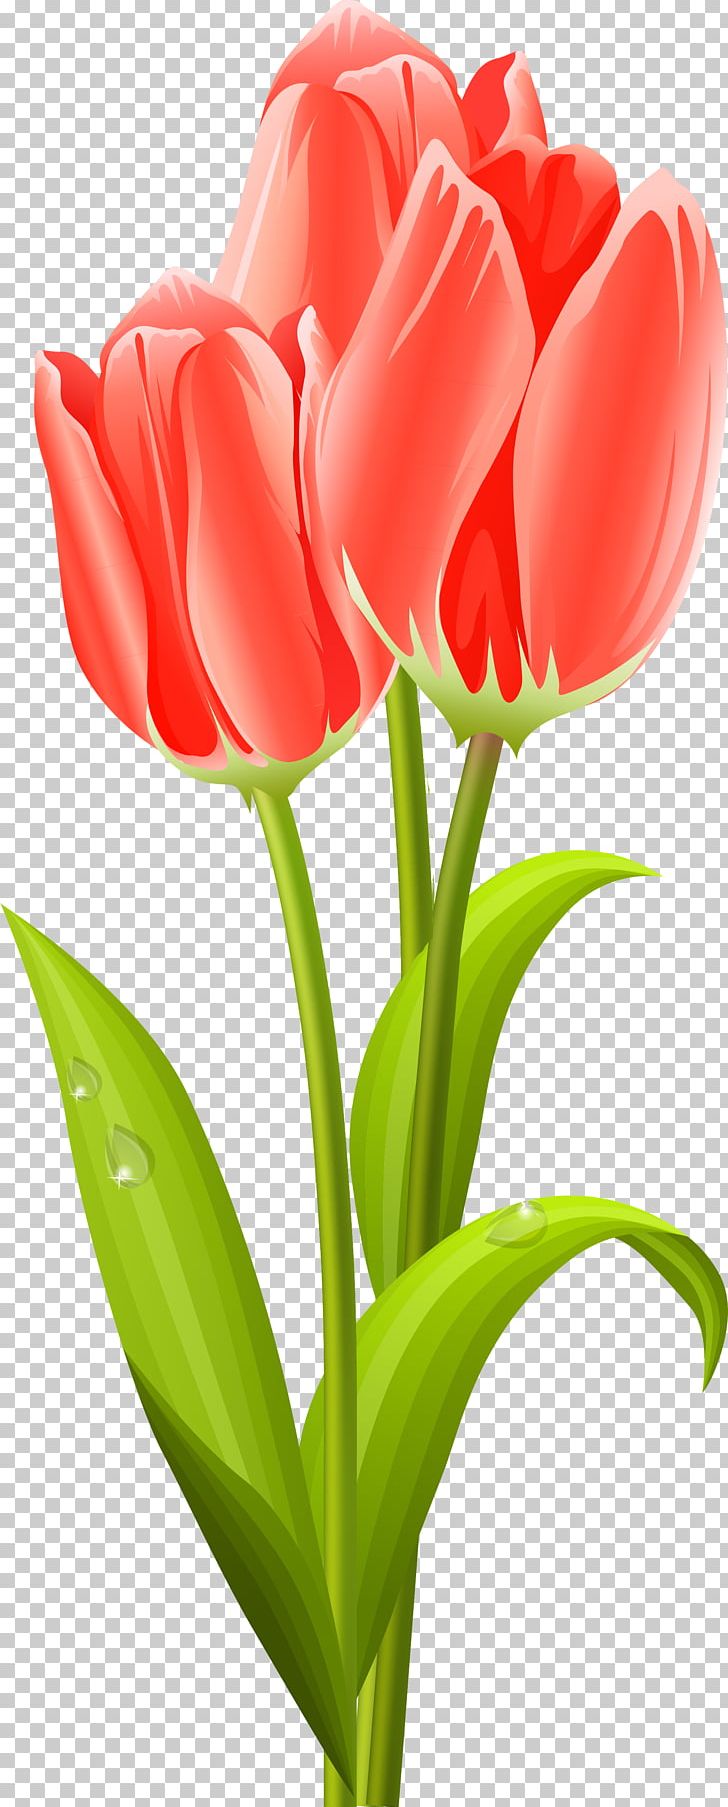 Tulip Flower Bouquet PNG, Clipart, Beautiful, Bud, Cut Flowers, Floral Design, Floristry Free PNG Download